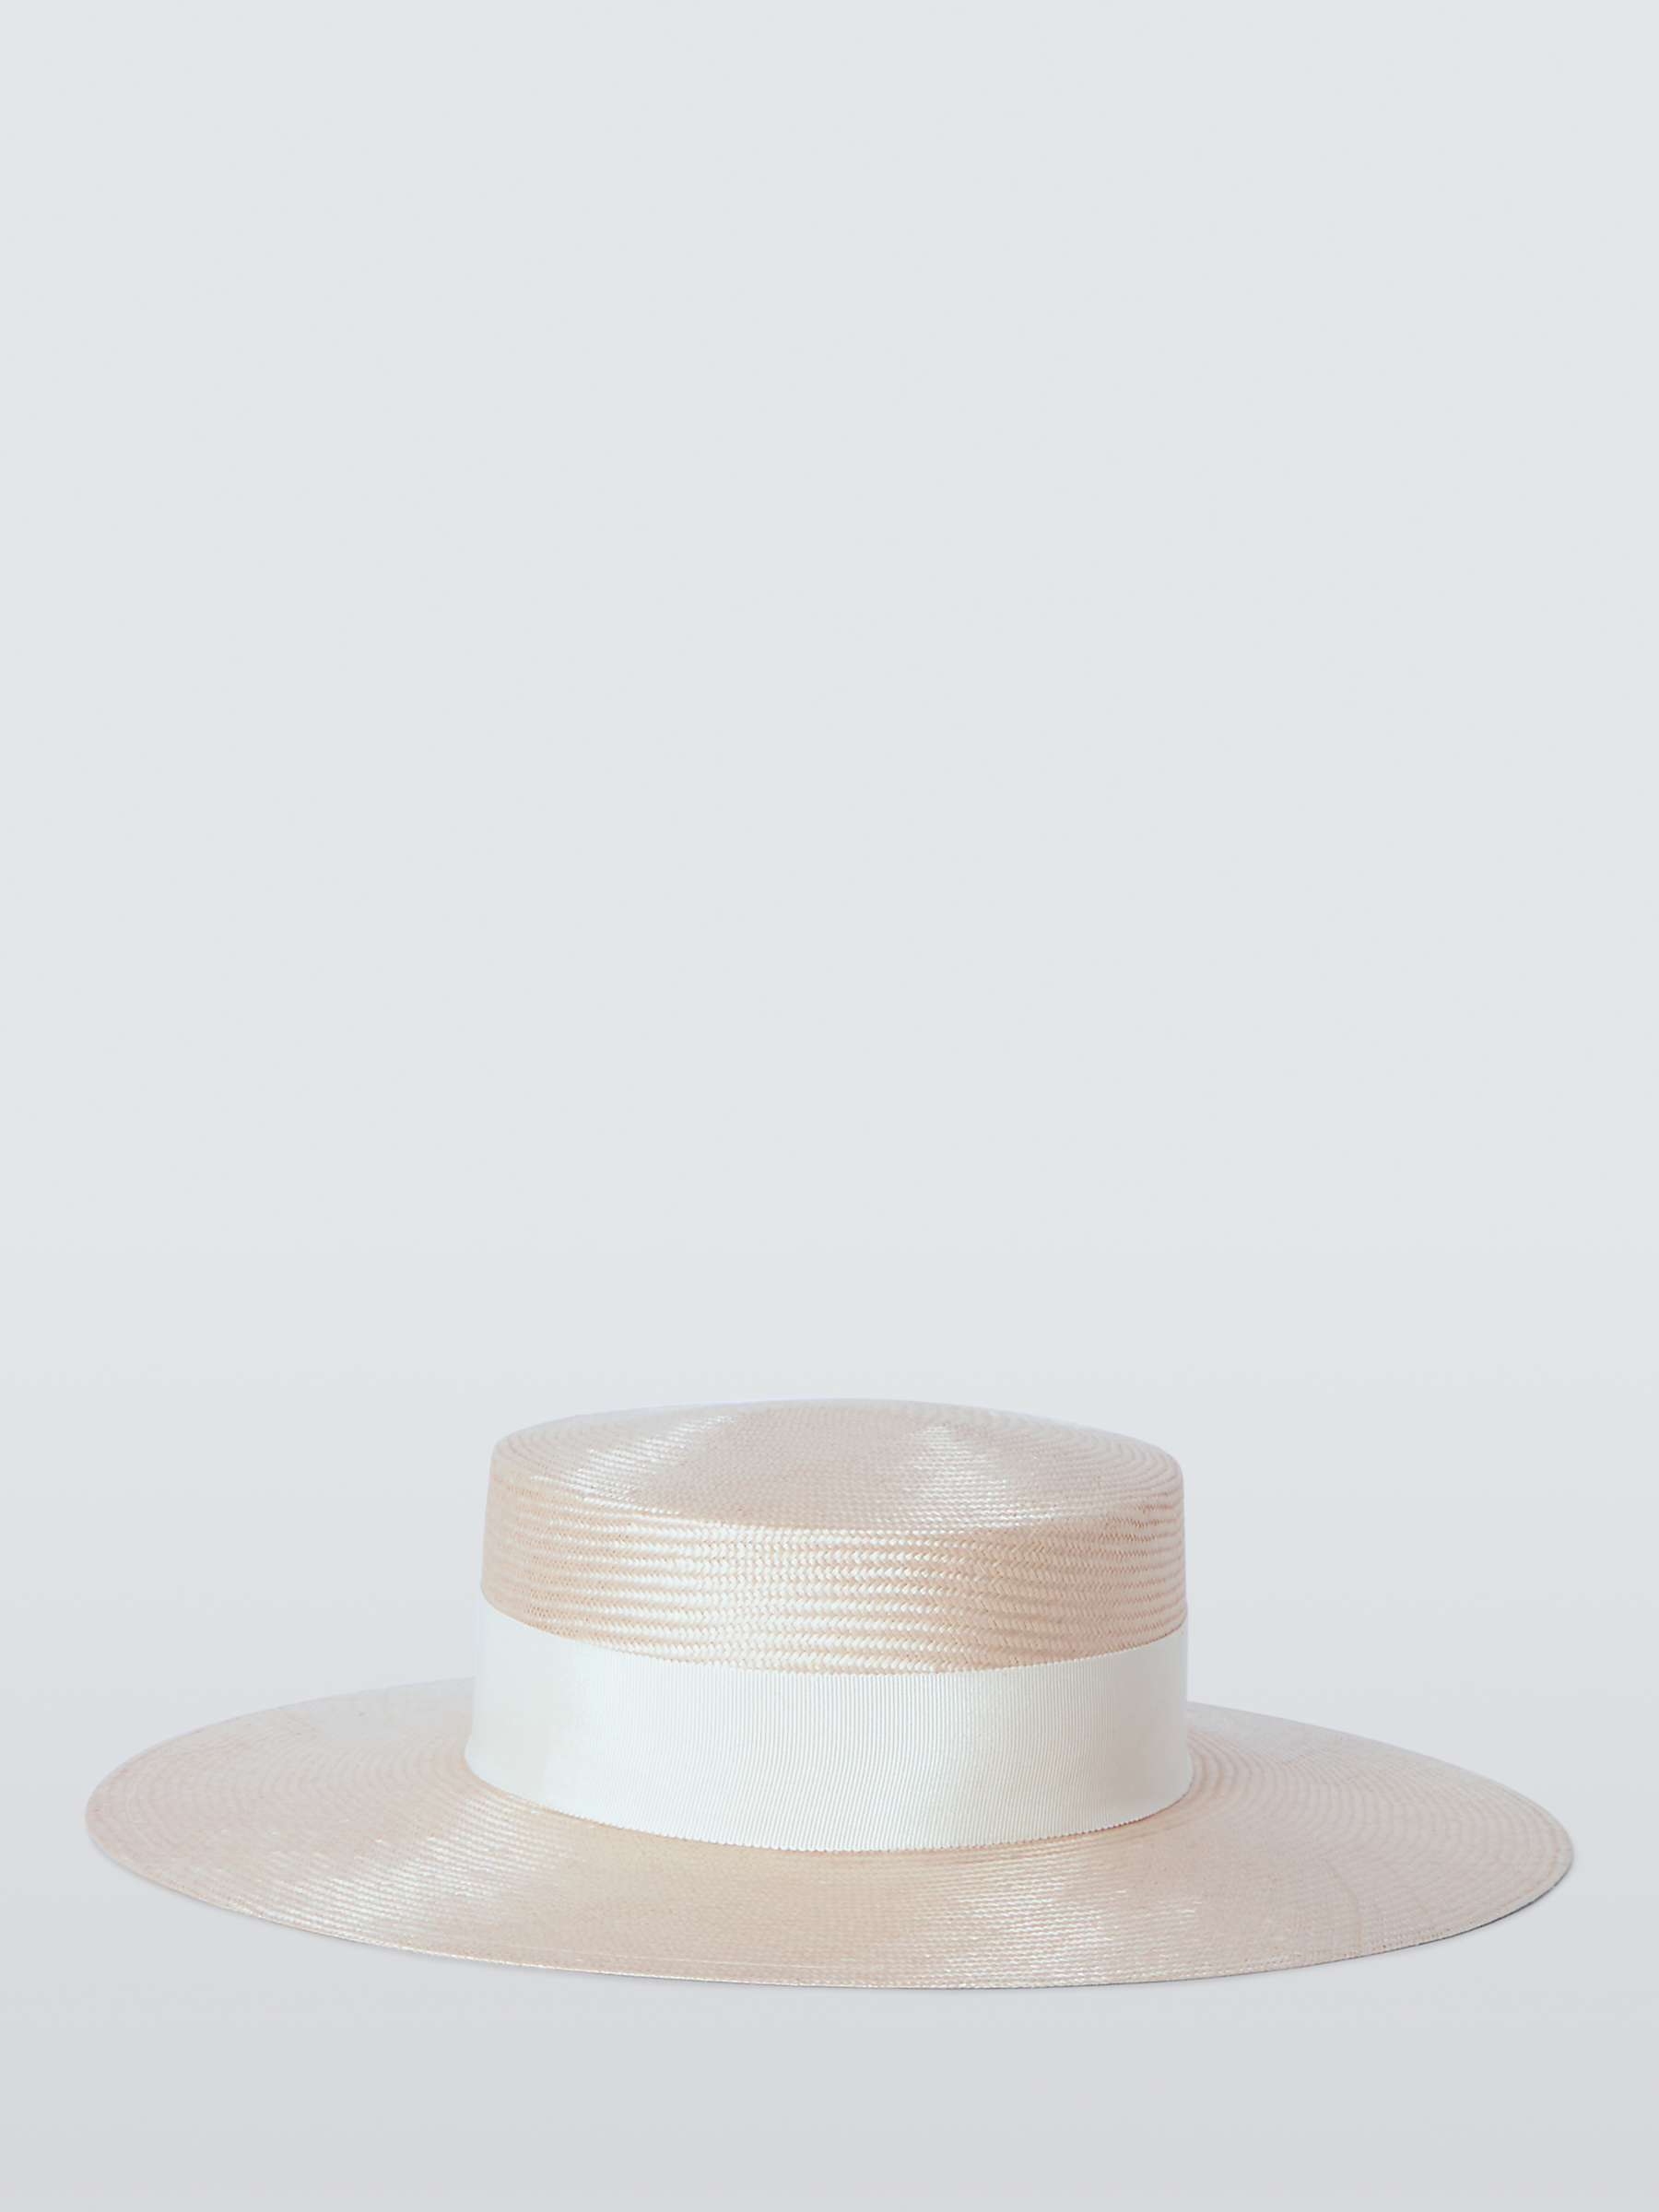 Buy Whiteley Made in England Heidi Boater Hat Online at johnlewis.com